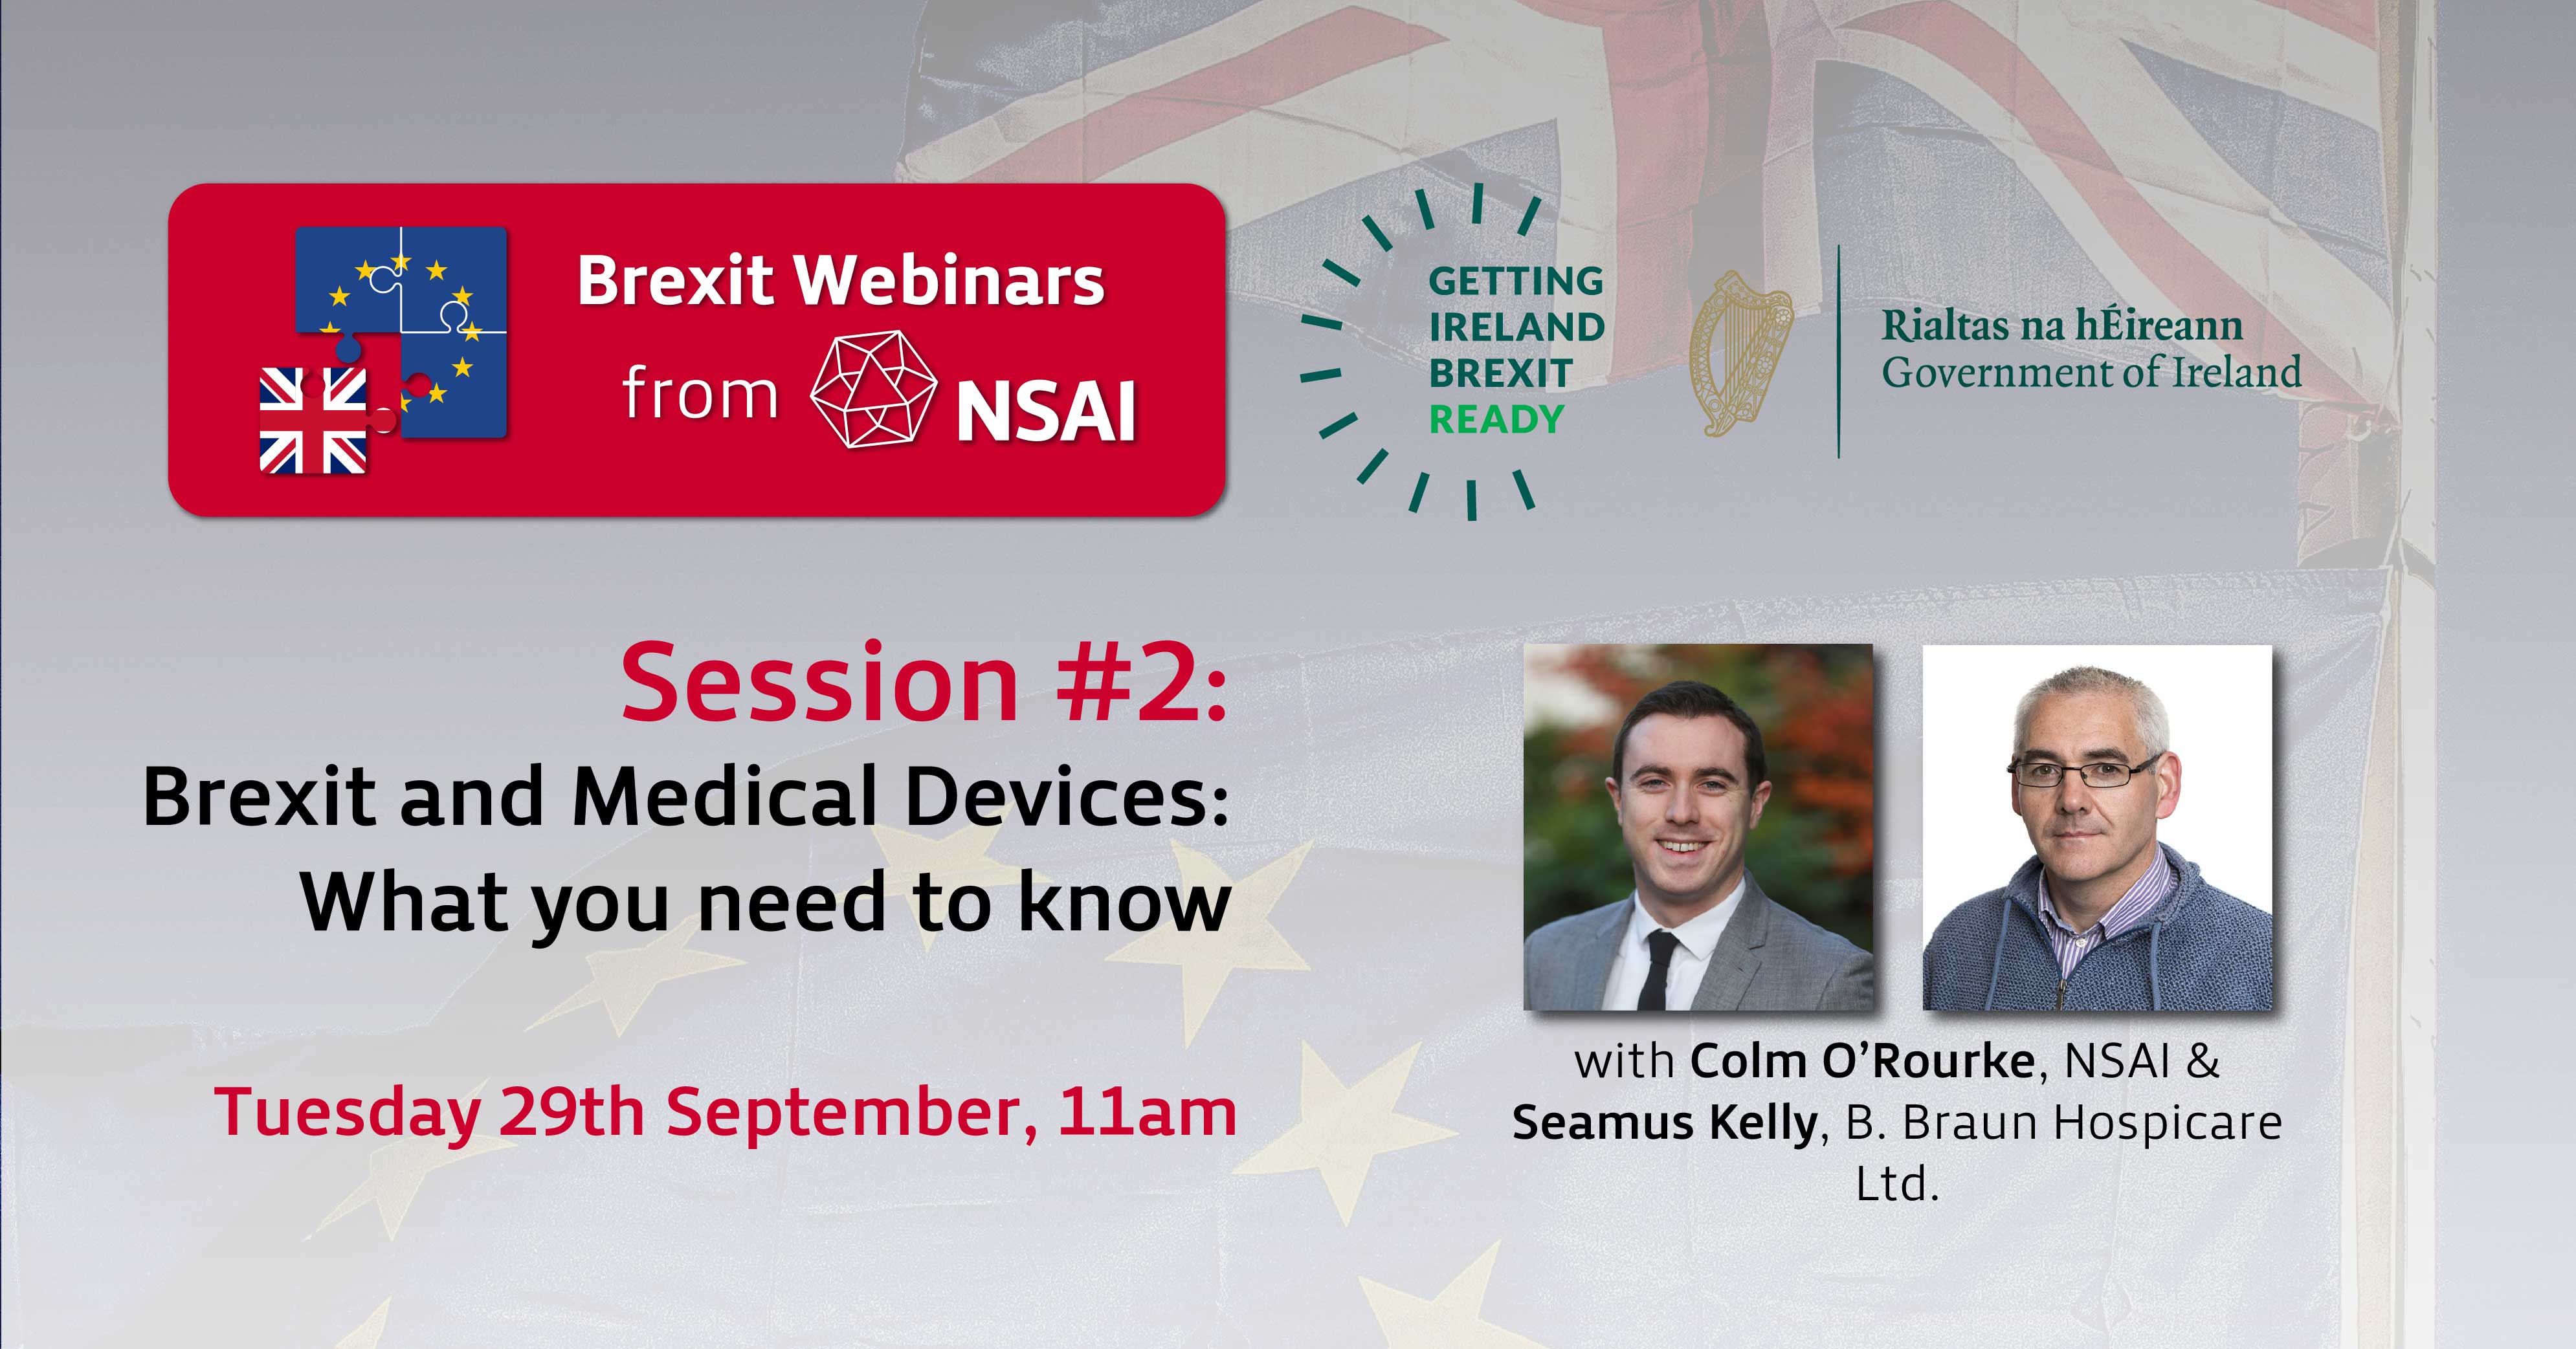 Brexit Webinars from NSAI Session #2: Brexit and Medical Devices: What you need to know with Colm O'Rourke, NSAI & Seamus Kelly, B. Braun Hospicare Ltd. Tuesday 29th September, 11am